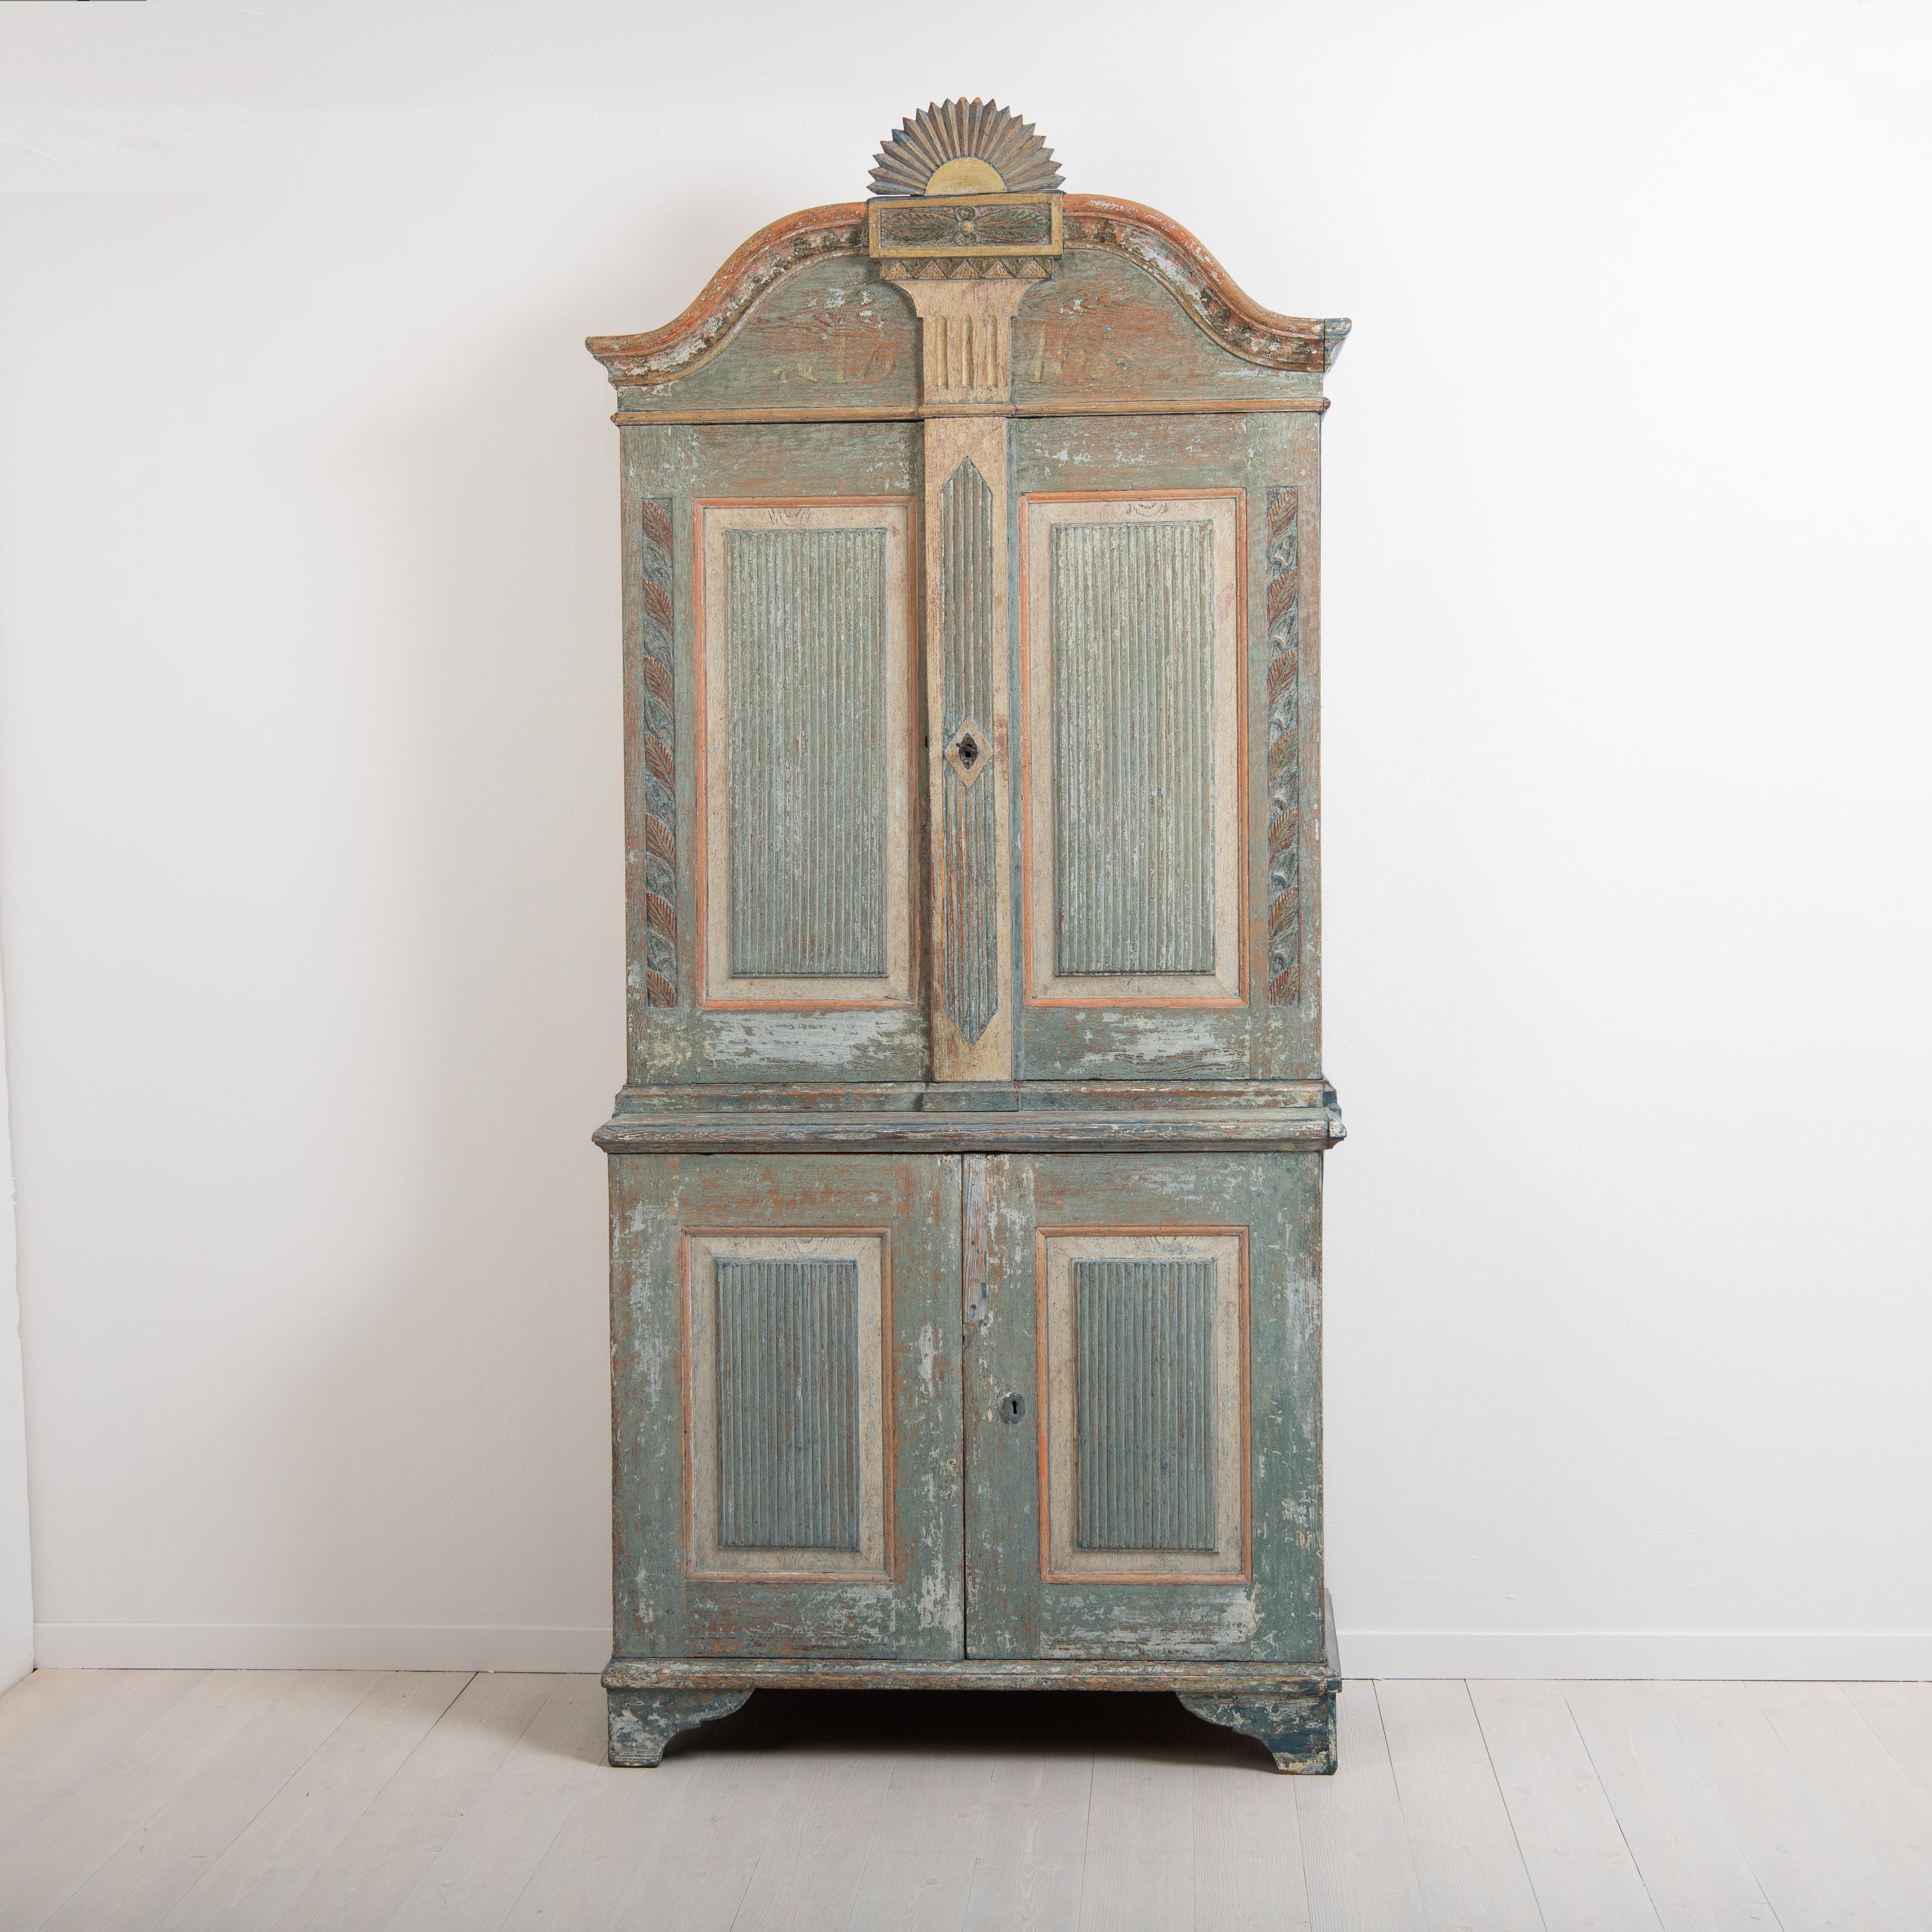 Rare Gustavian cabinet from Hälsingland dated 1816. Likely made by master carpenter Olof Brink Alfa. Dry scarped to original paint. Very richly decorated with unusual carved wooden decorations in the shape of leafs on the sides. Doors with fluted